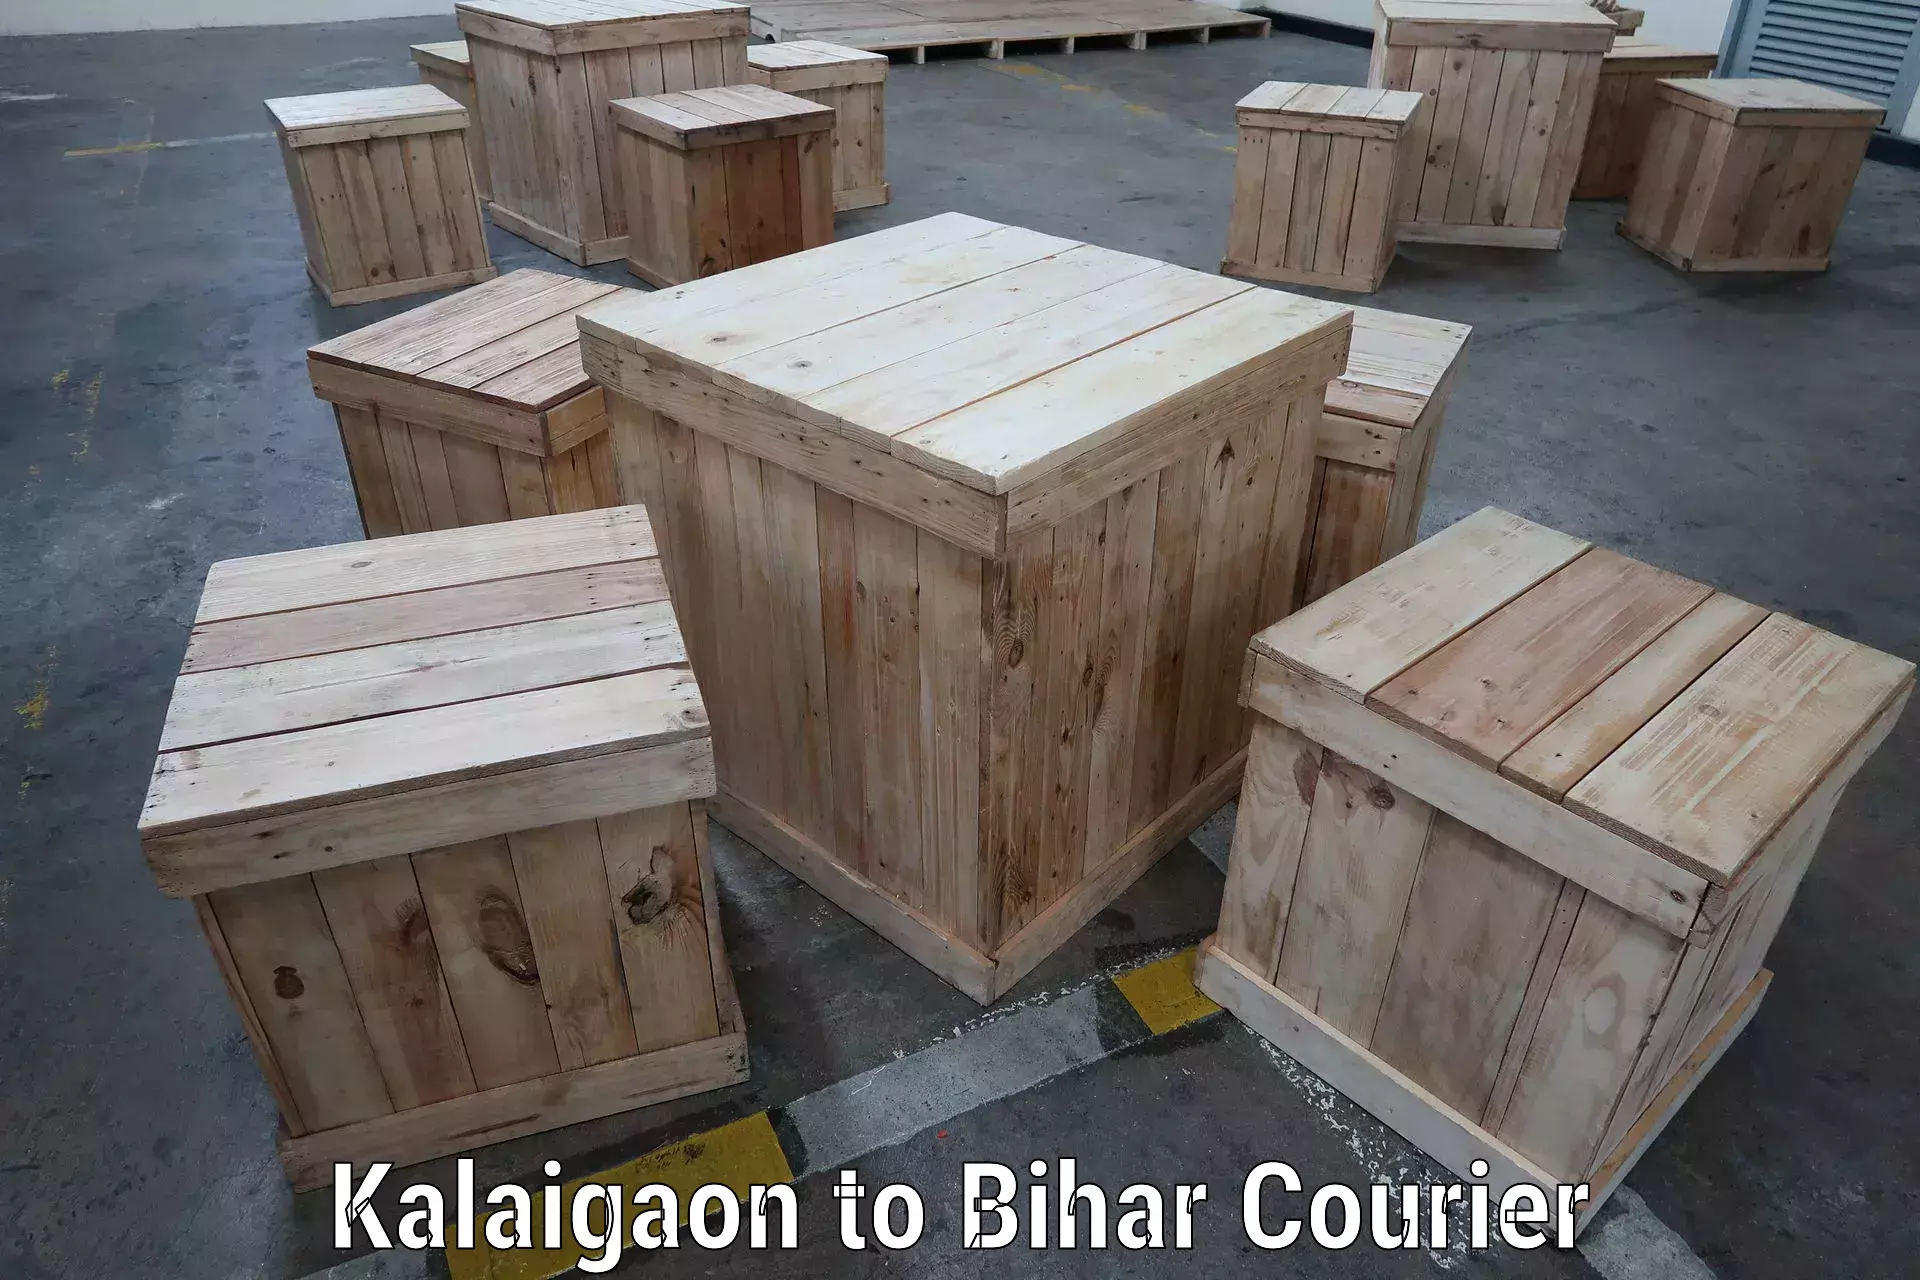 Local courier options in Kalaigaon to Bihar